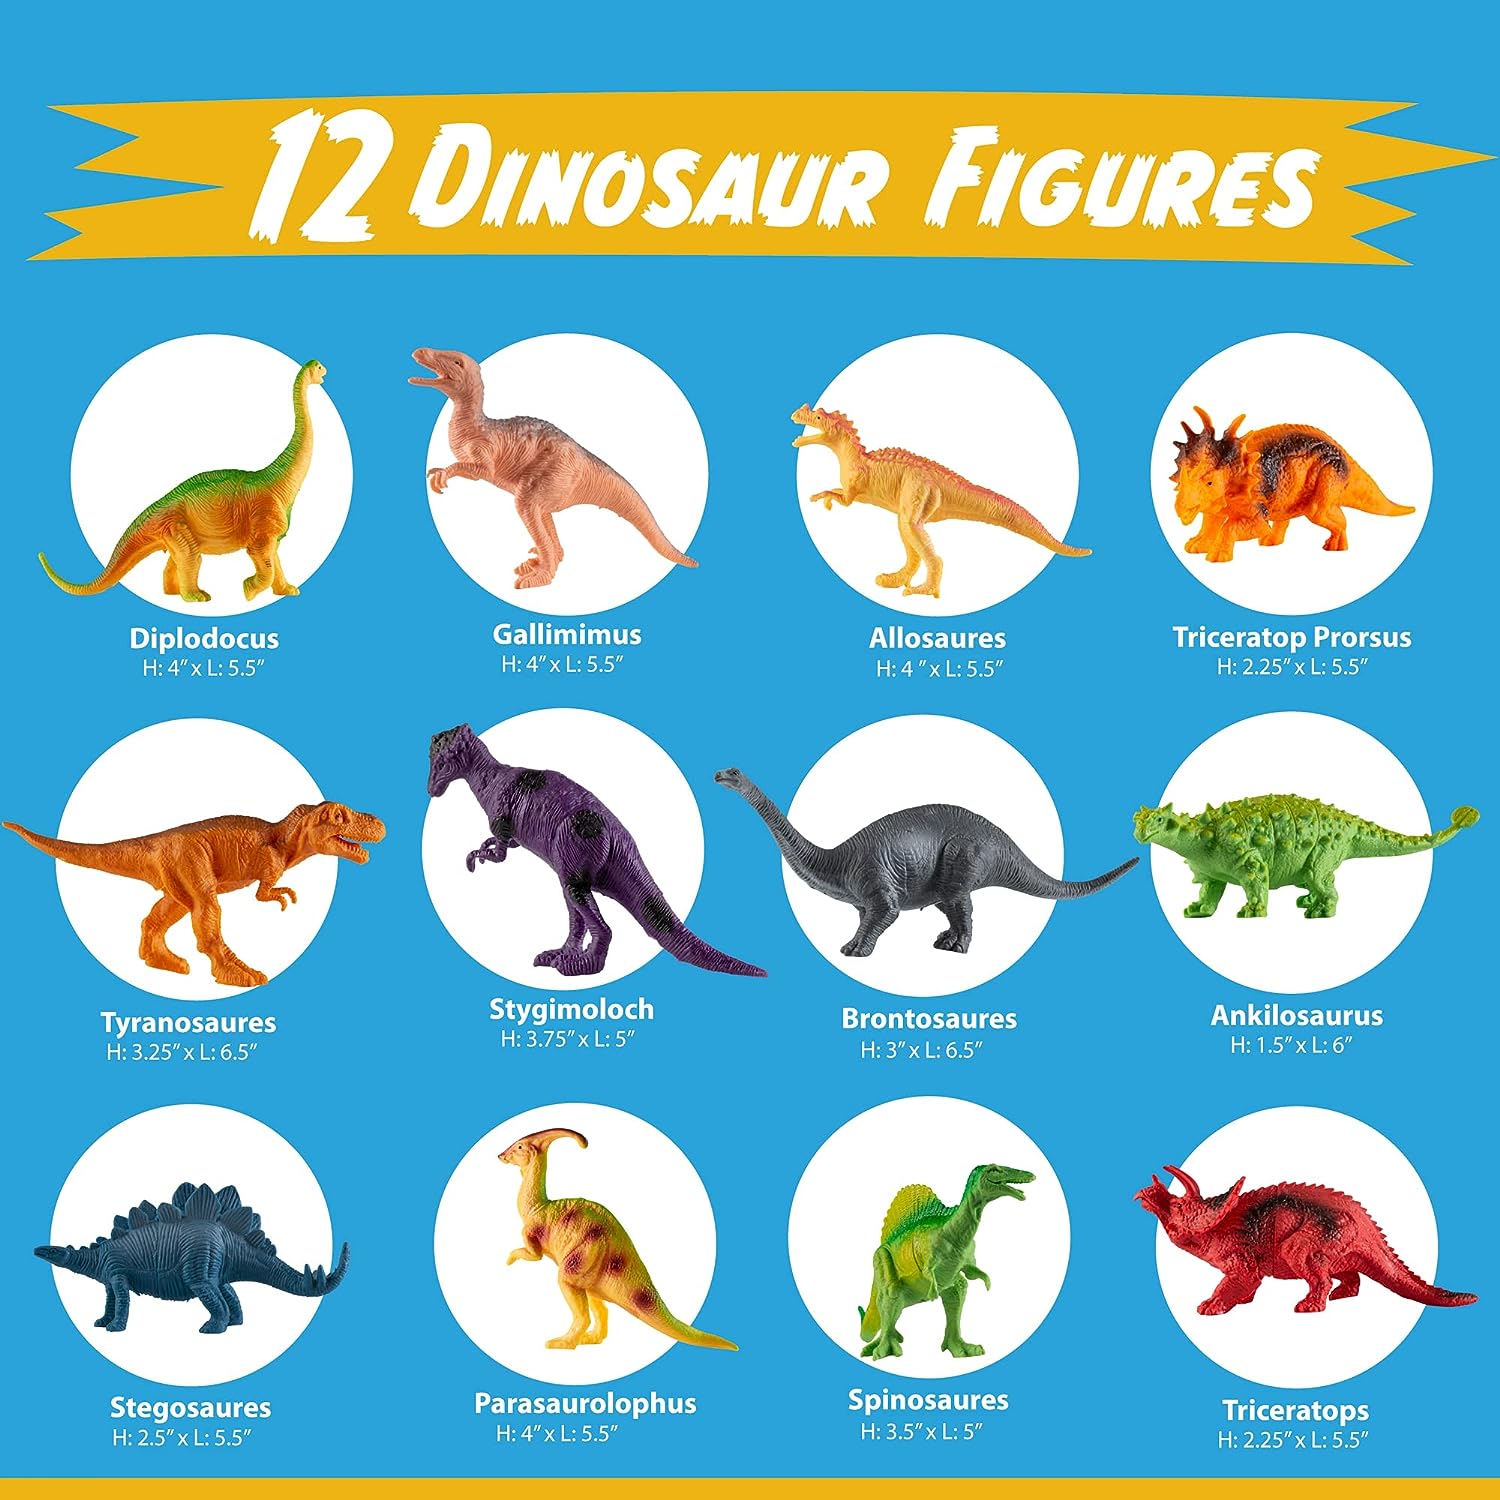 PLAYBEA Dinosaur Toys - 12 7-Inch Realistic Dinosaurs Figures with Storage Box |Dino Toys for Kids 3-5 5-7 | Toddler Boy Toys